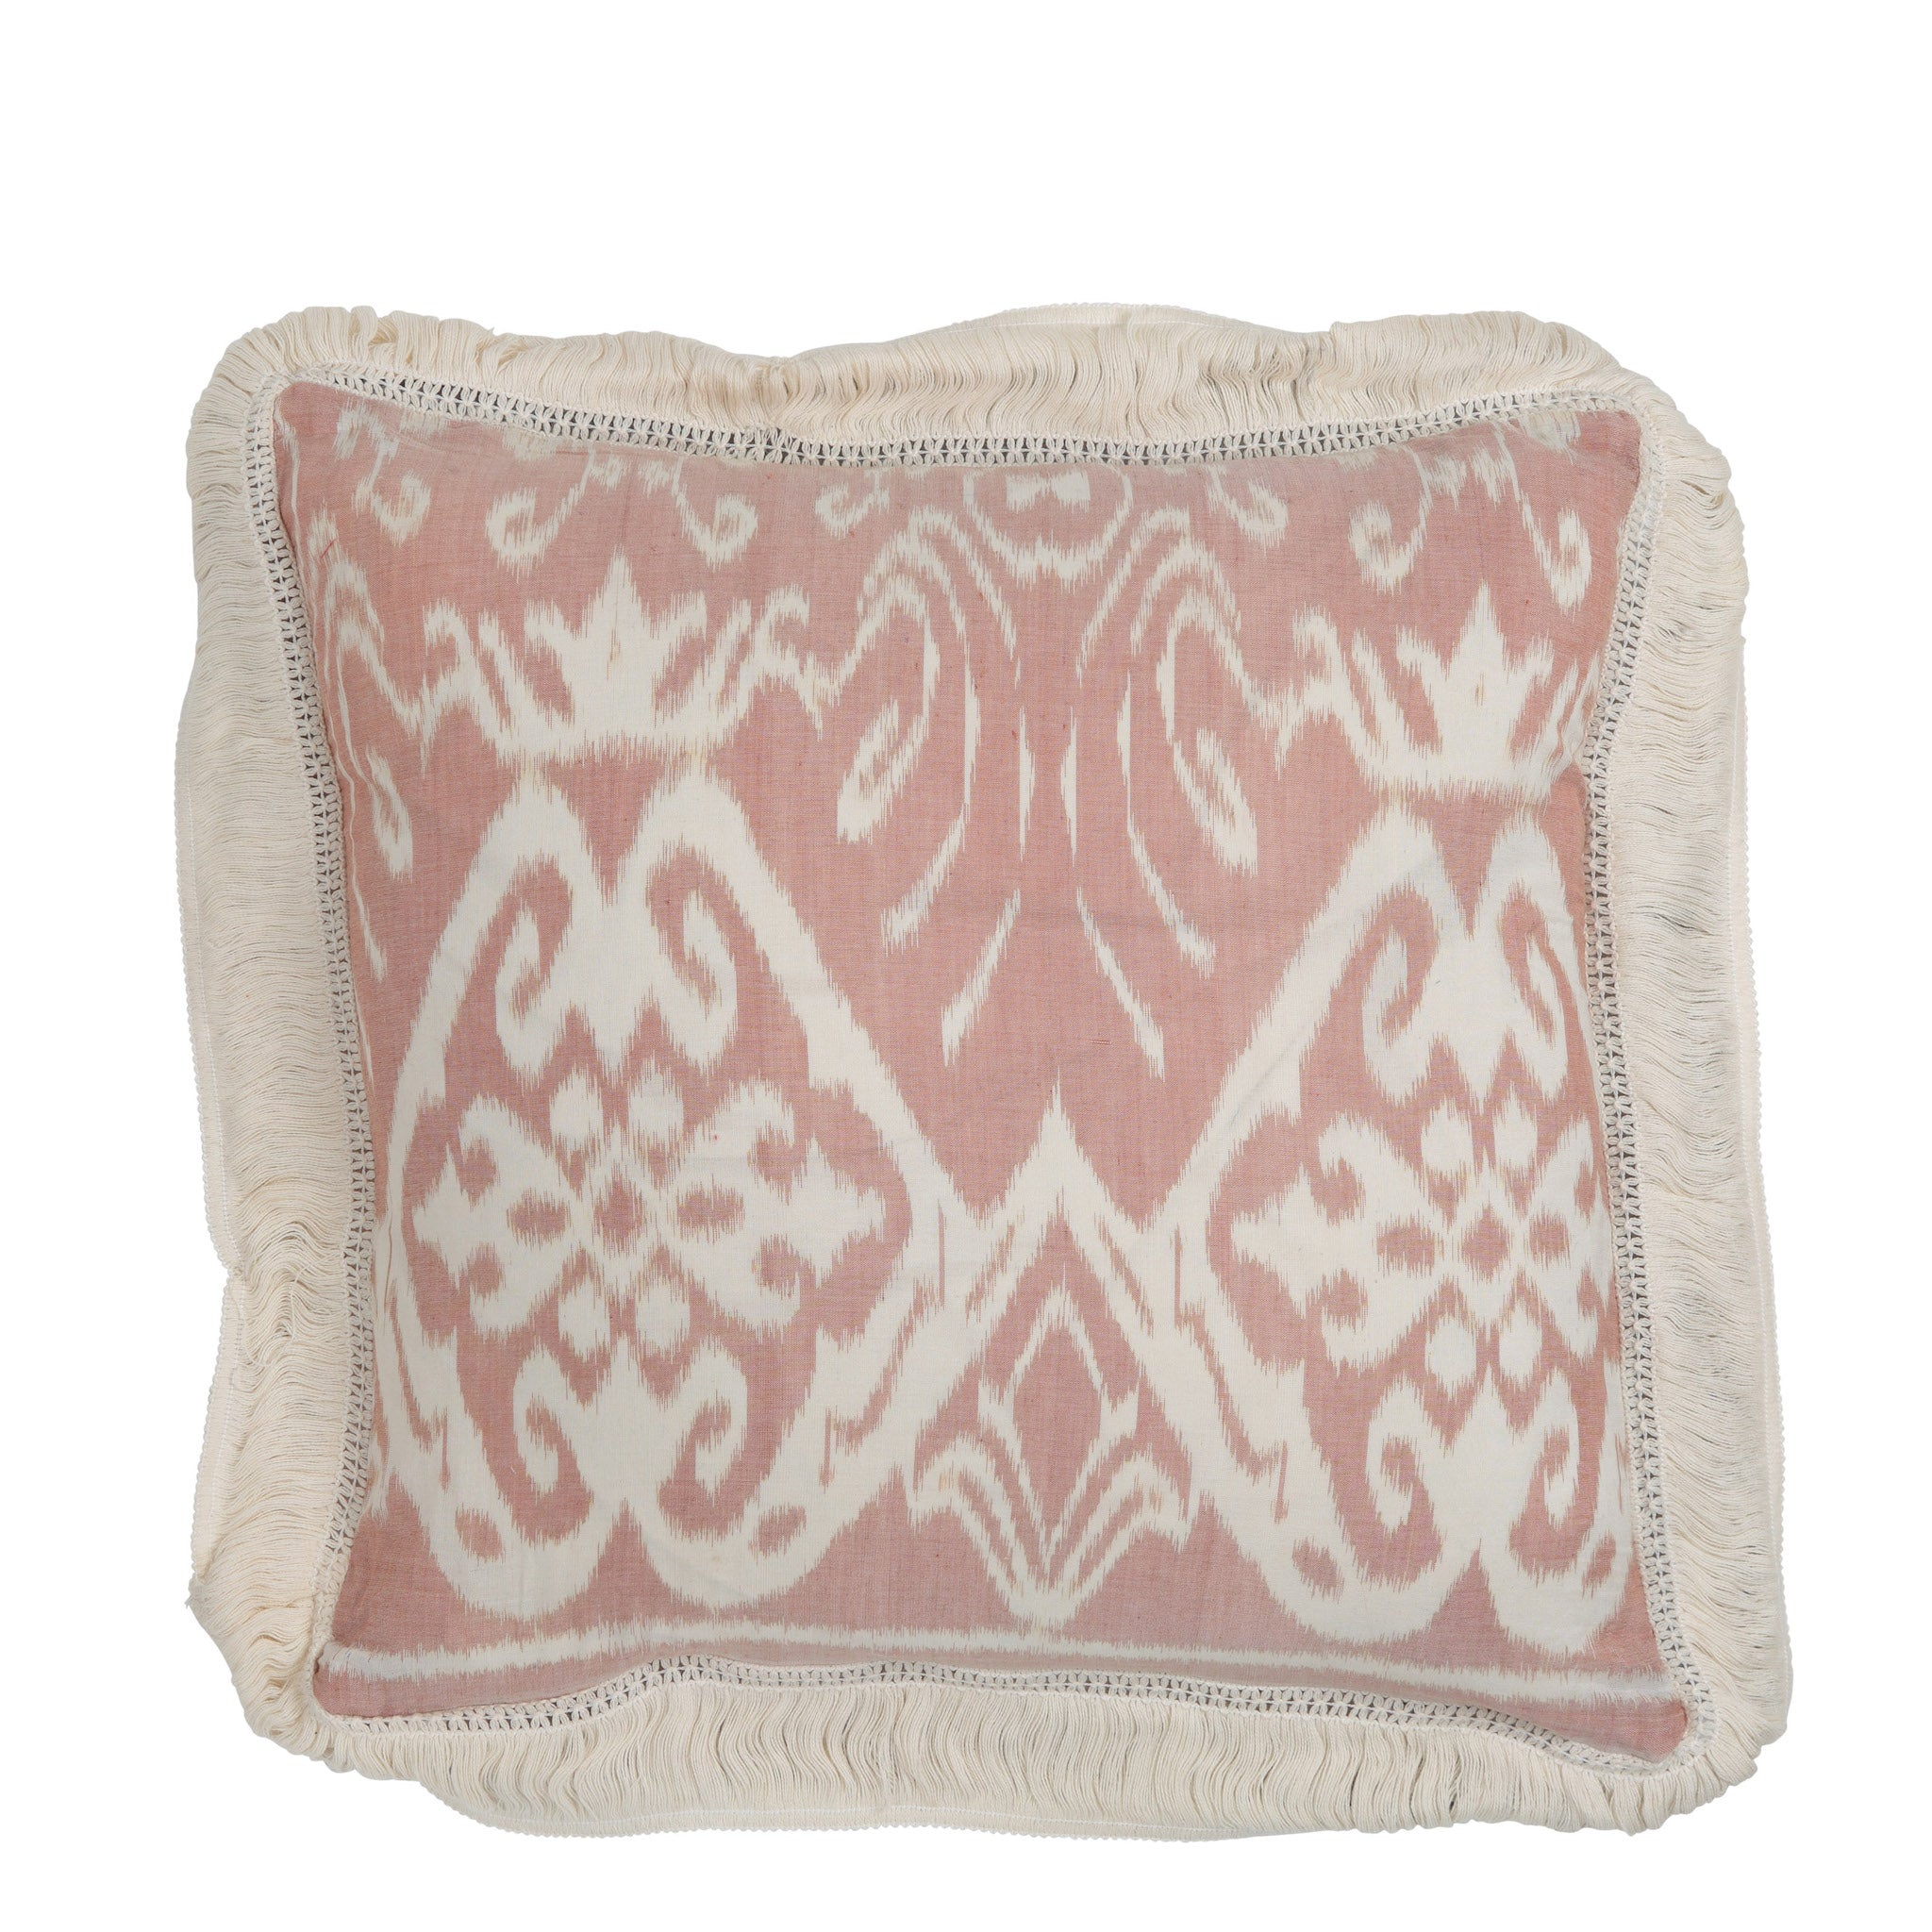 Blush Pink and Cream Square / Scatter Ikat Cushion with Fringe from Bali - FRONT